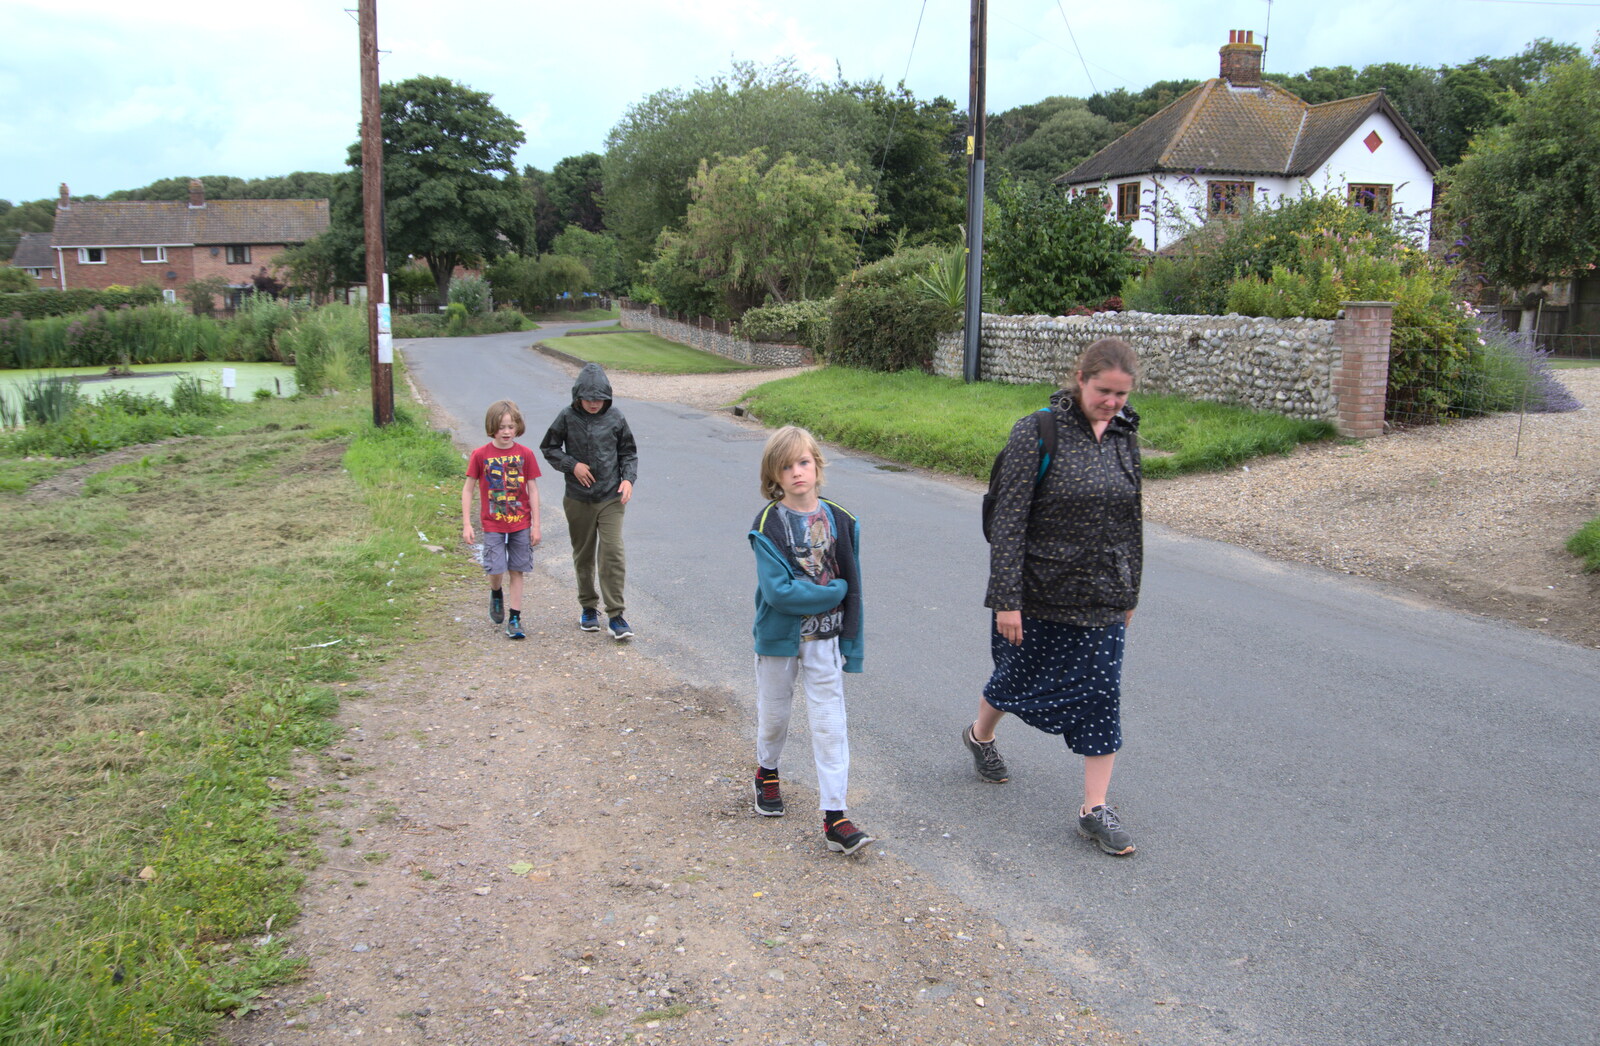 Harry and the gang from Camping on the Coast, East Runton, North Norfolk - 25th July 2020